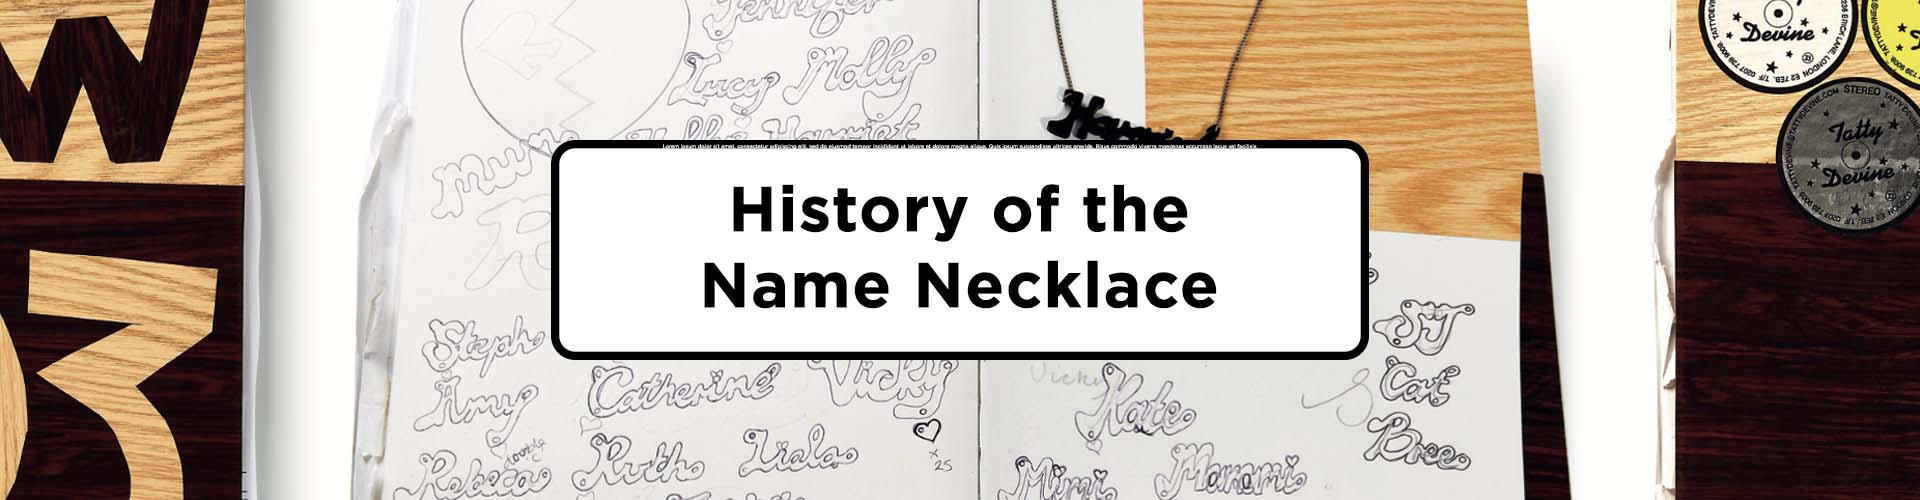 History of the Name Necklace